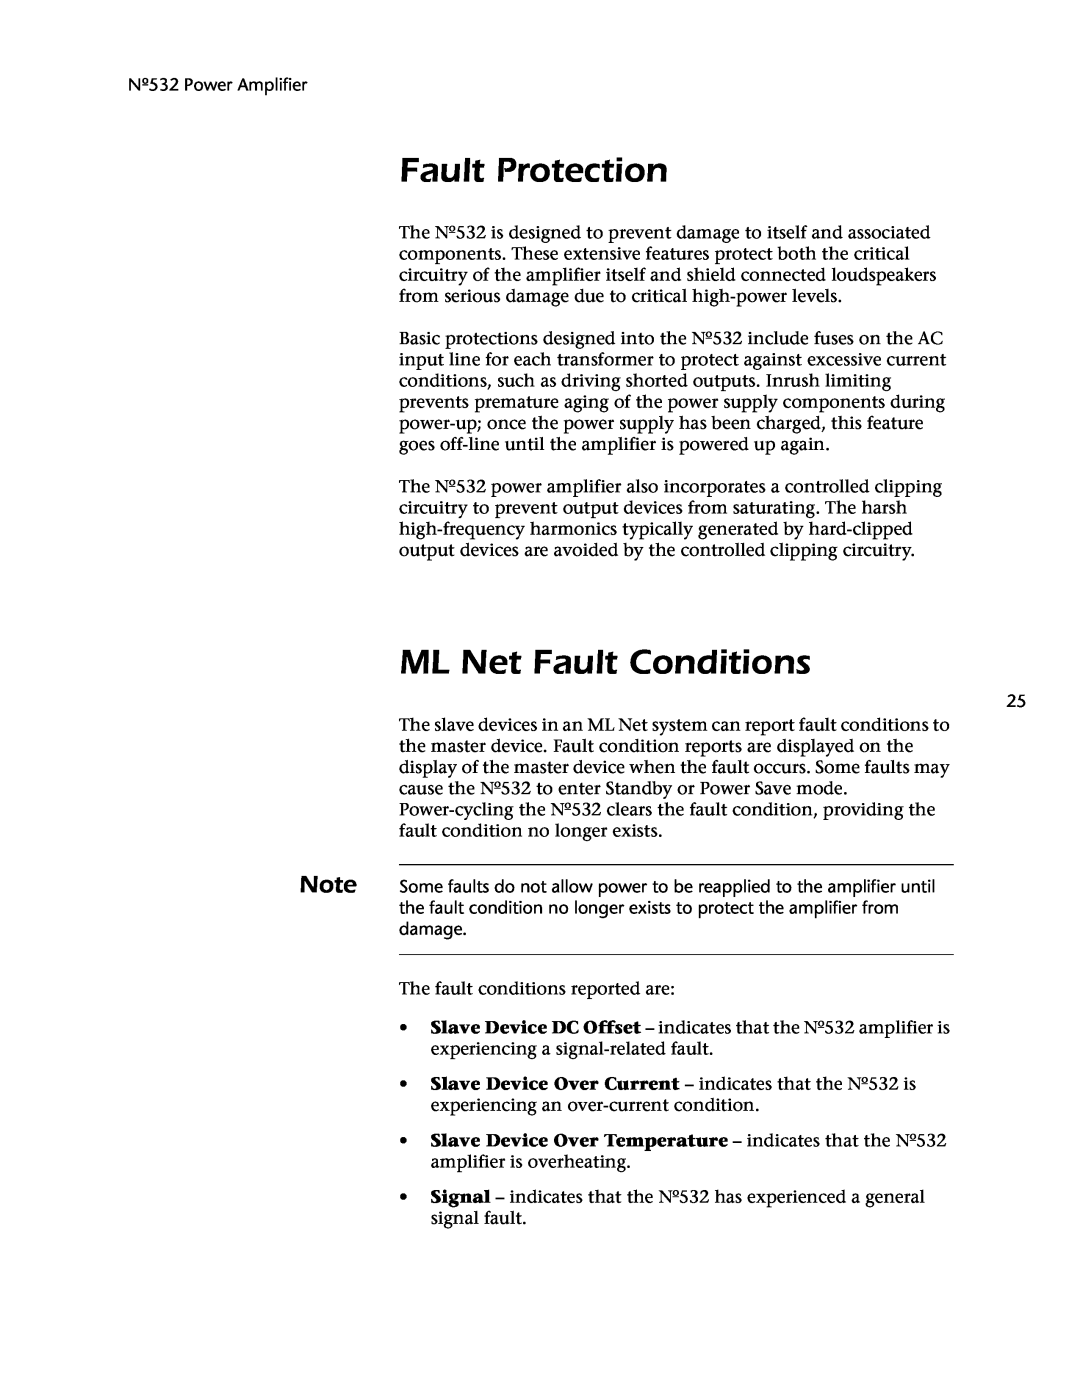 Mark Levinson 532 owner manual Fault Protection, ML Net Fault Conditions 